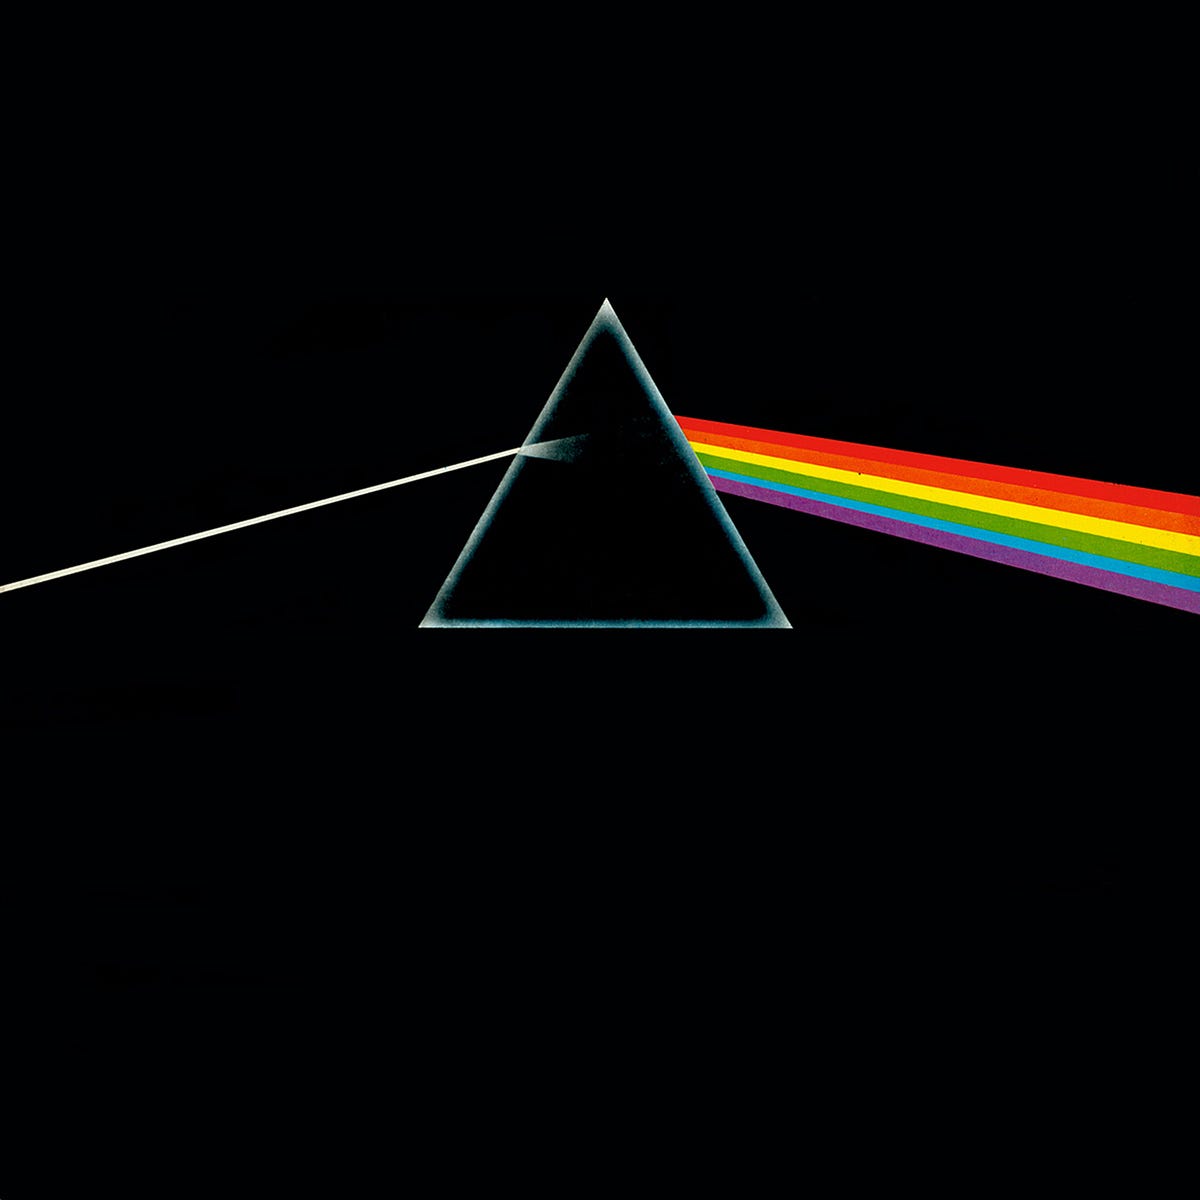 “The Dark Side of the Moon” How an Album Cover Became an Icon